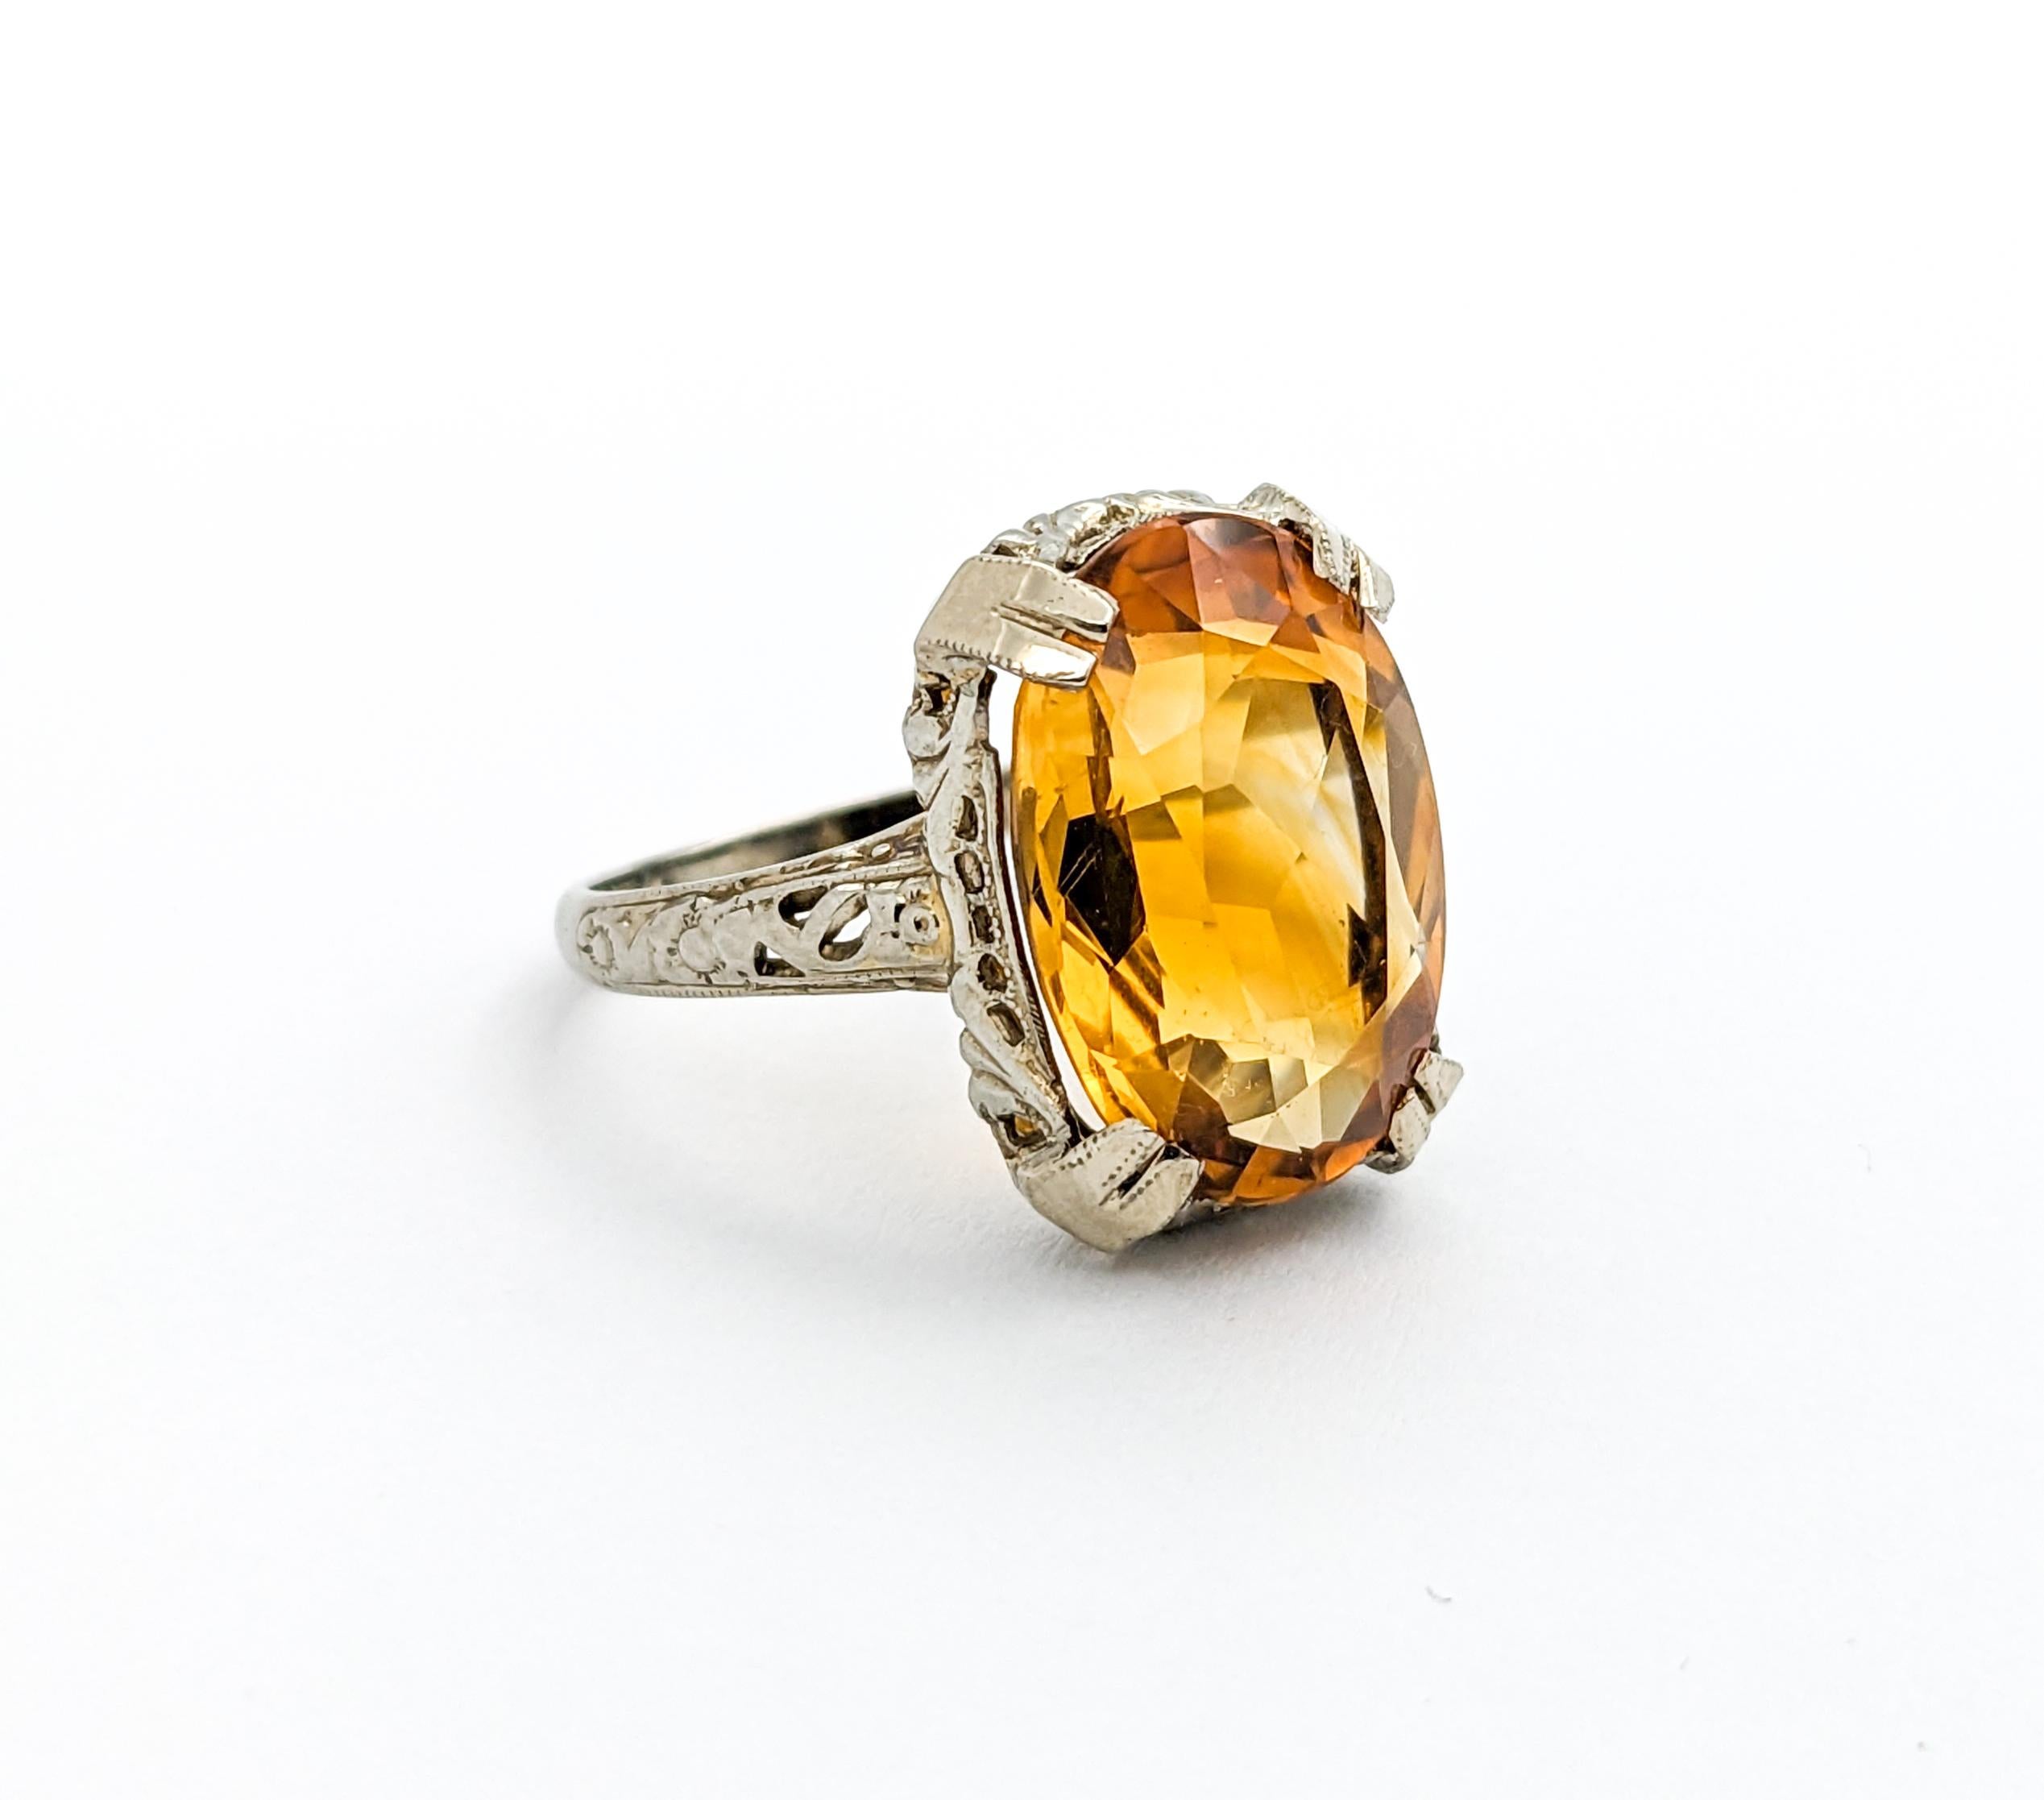 8ct Oval Citrine Ring In White Gold

Introducing a magnificent Citrine Ring with a beautiful Art Deco Filigree setting in 14K white gold. At the heart of this exquisite piece is an 8ct 15.5x11.3mm oval citrine, radiant with honey-like warmth. The